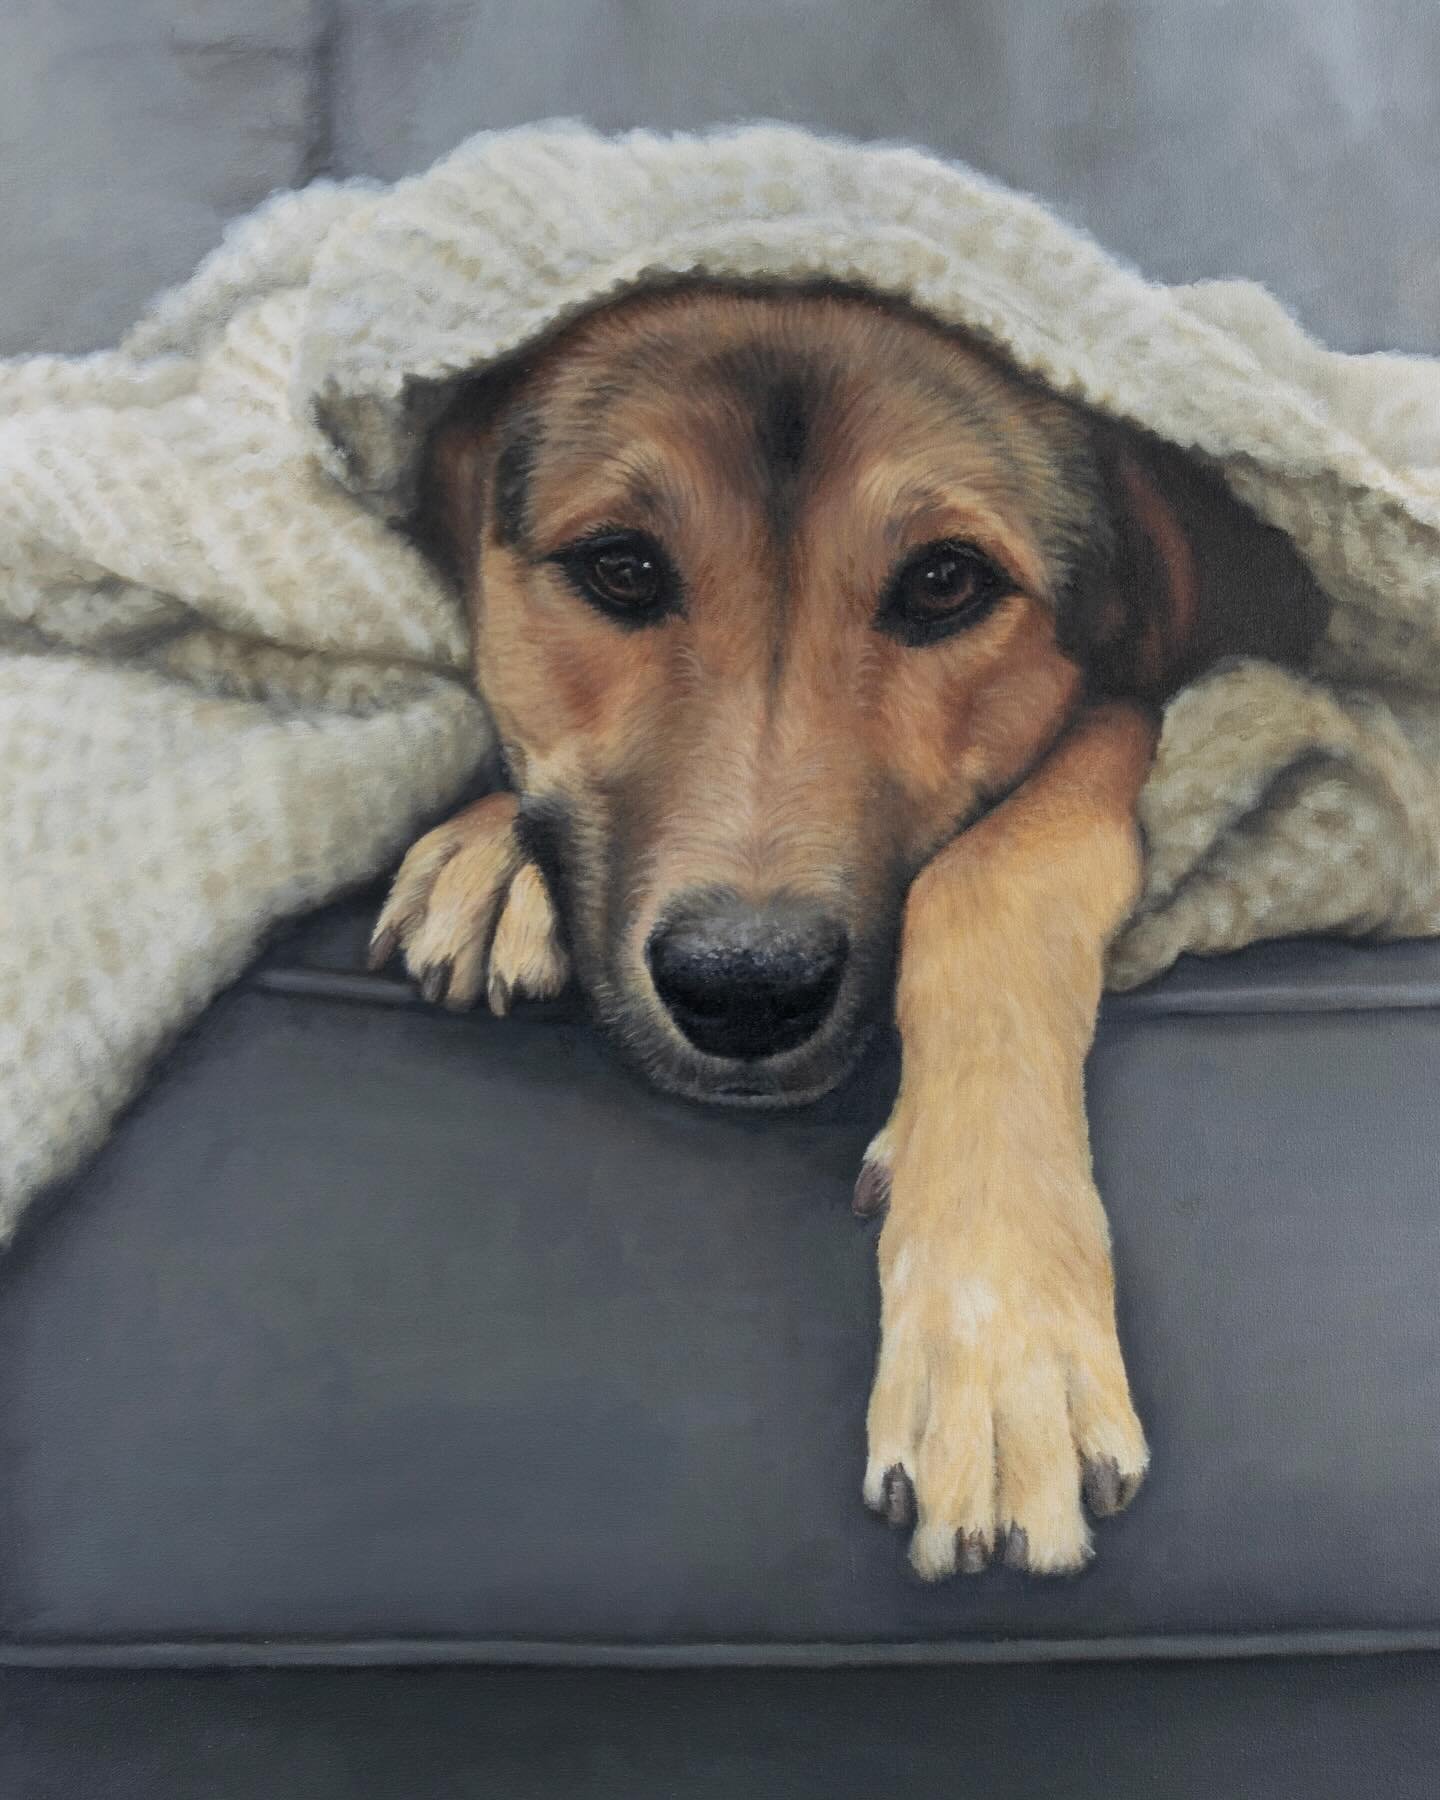 Hot off the Easel!🎨
New pet portrait: &ldquo;Me and My Blanket&rdquo;, oil on canvas, 18 x 24in. 

This depiction of a beloved German Shepard evokes calm and serenity, where a cuddly blanket can be a dog&rsquo;s other best friend and provide happine